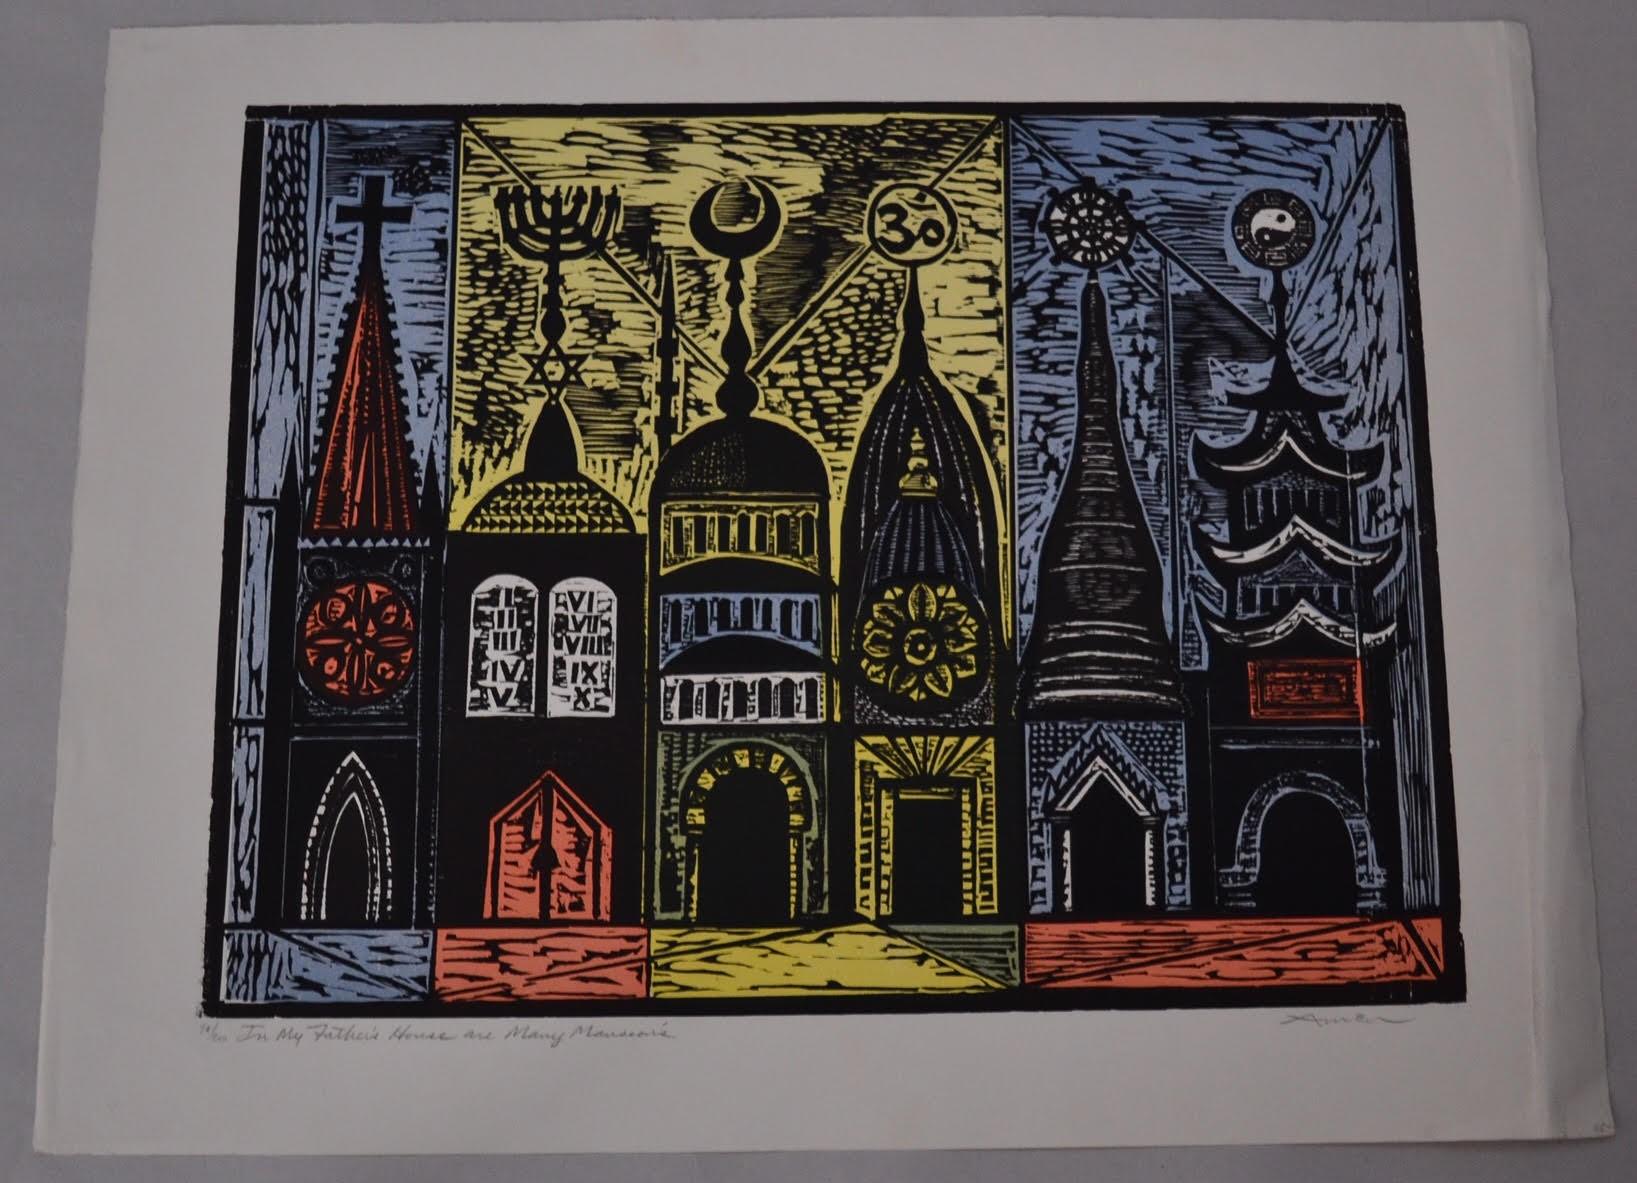 A wonderfully designed, very sought after woodcut image by New York City/ American born Jewish artist Irving Amen. 

Pencil signed, titled (In My Father's House Are Many Mansions) and numbered (98/200) by the artist. 

There is also a black and